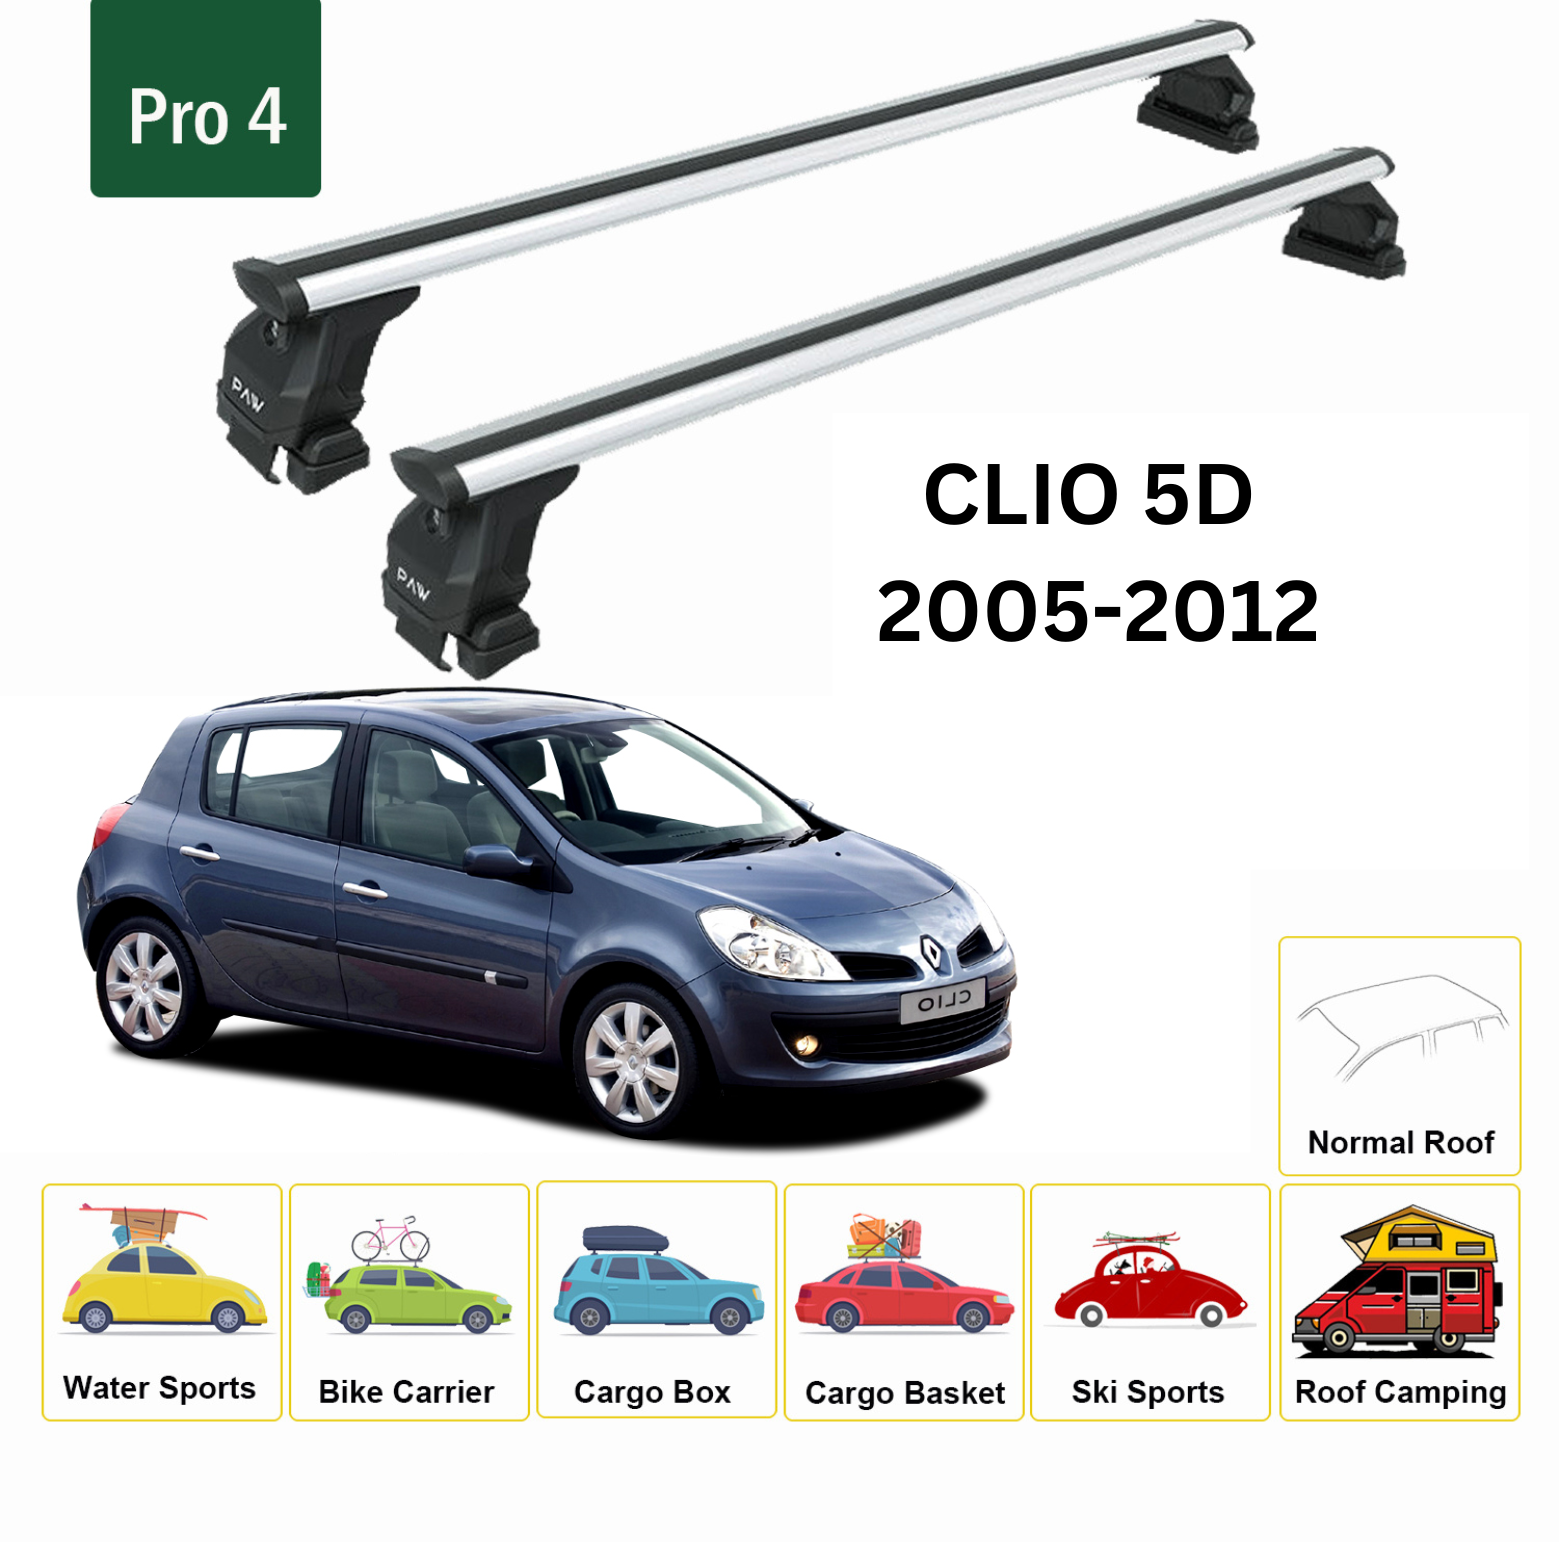 For Renault Clio 2005-2012 Roof Rack System, Aluminium Cross Bar, Metal Bracket, Normal Roof, Silver - 0